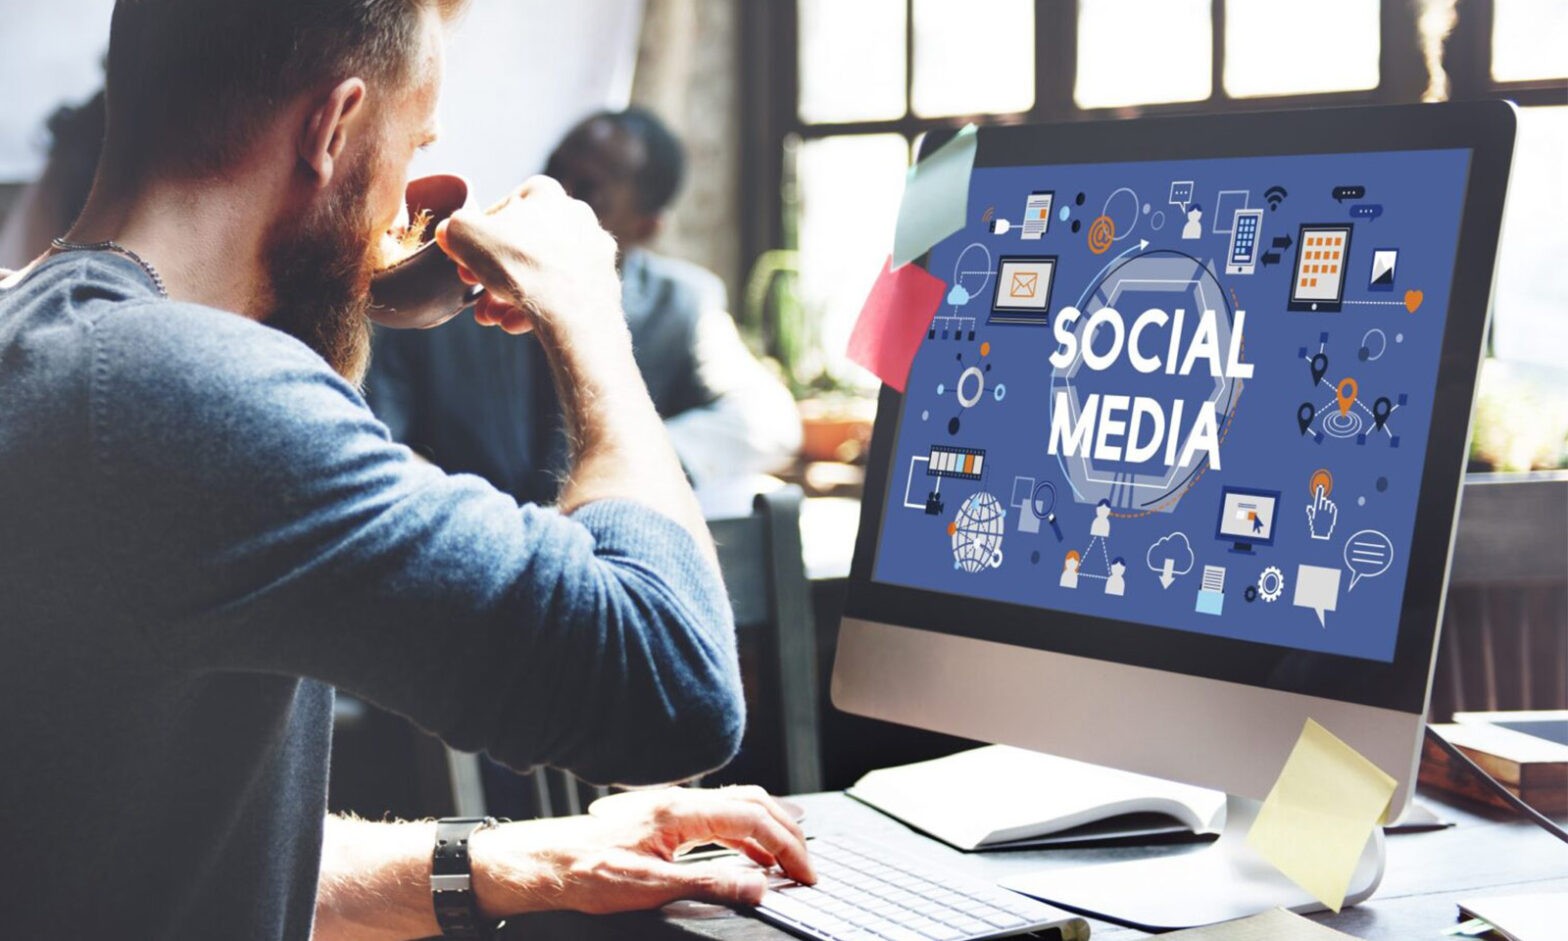 Featured image for post: How to Make the Most Out of Your Social Media Marketing Budget